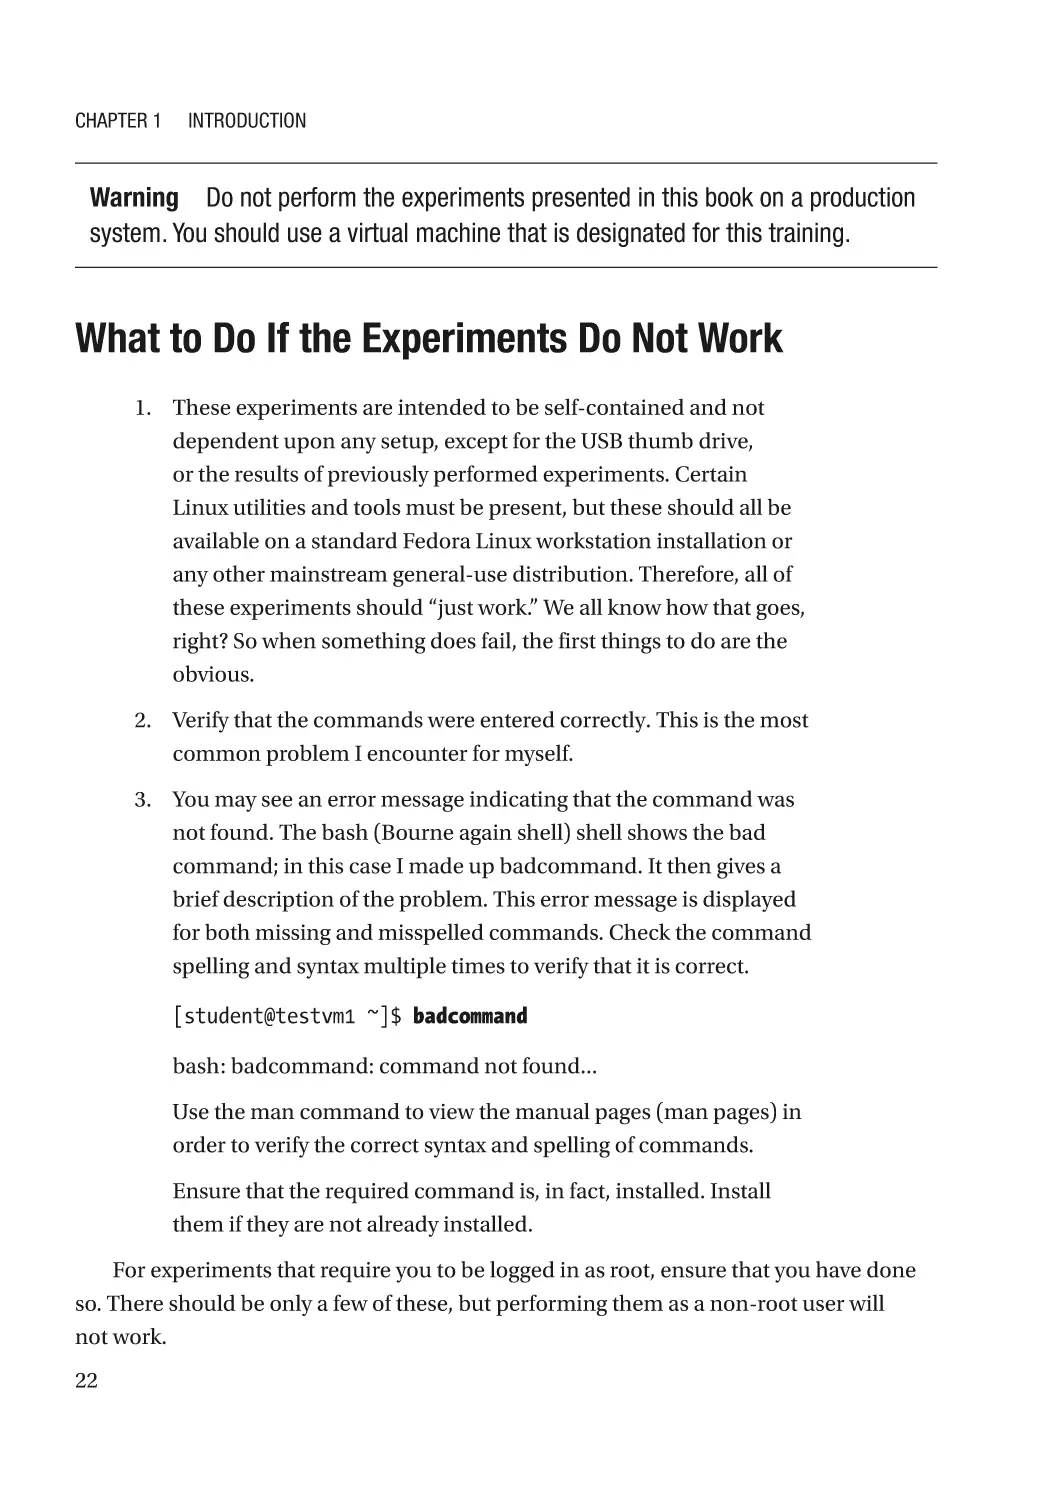 What to Do If the Experiments Do Not Work